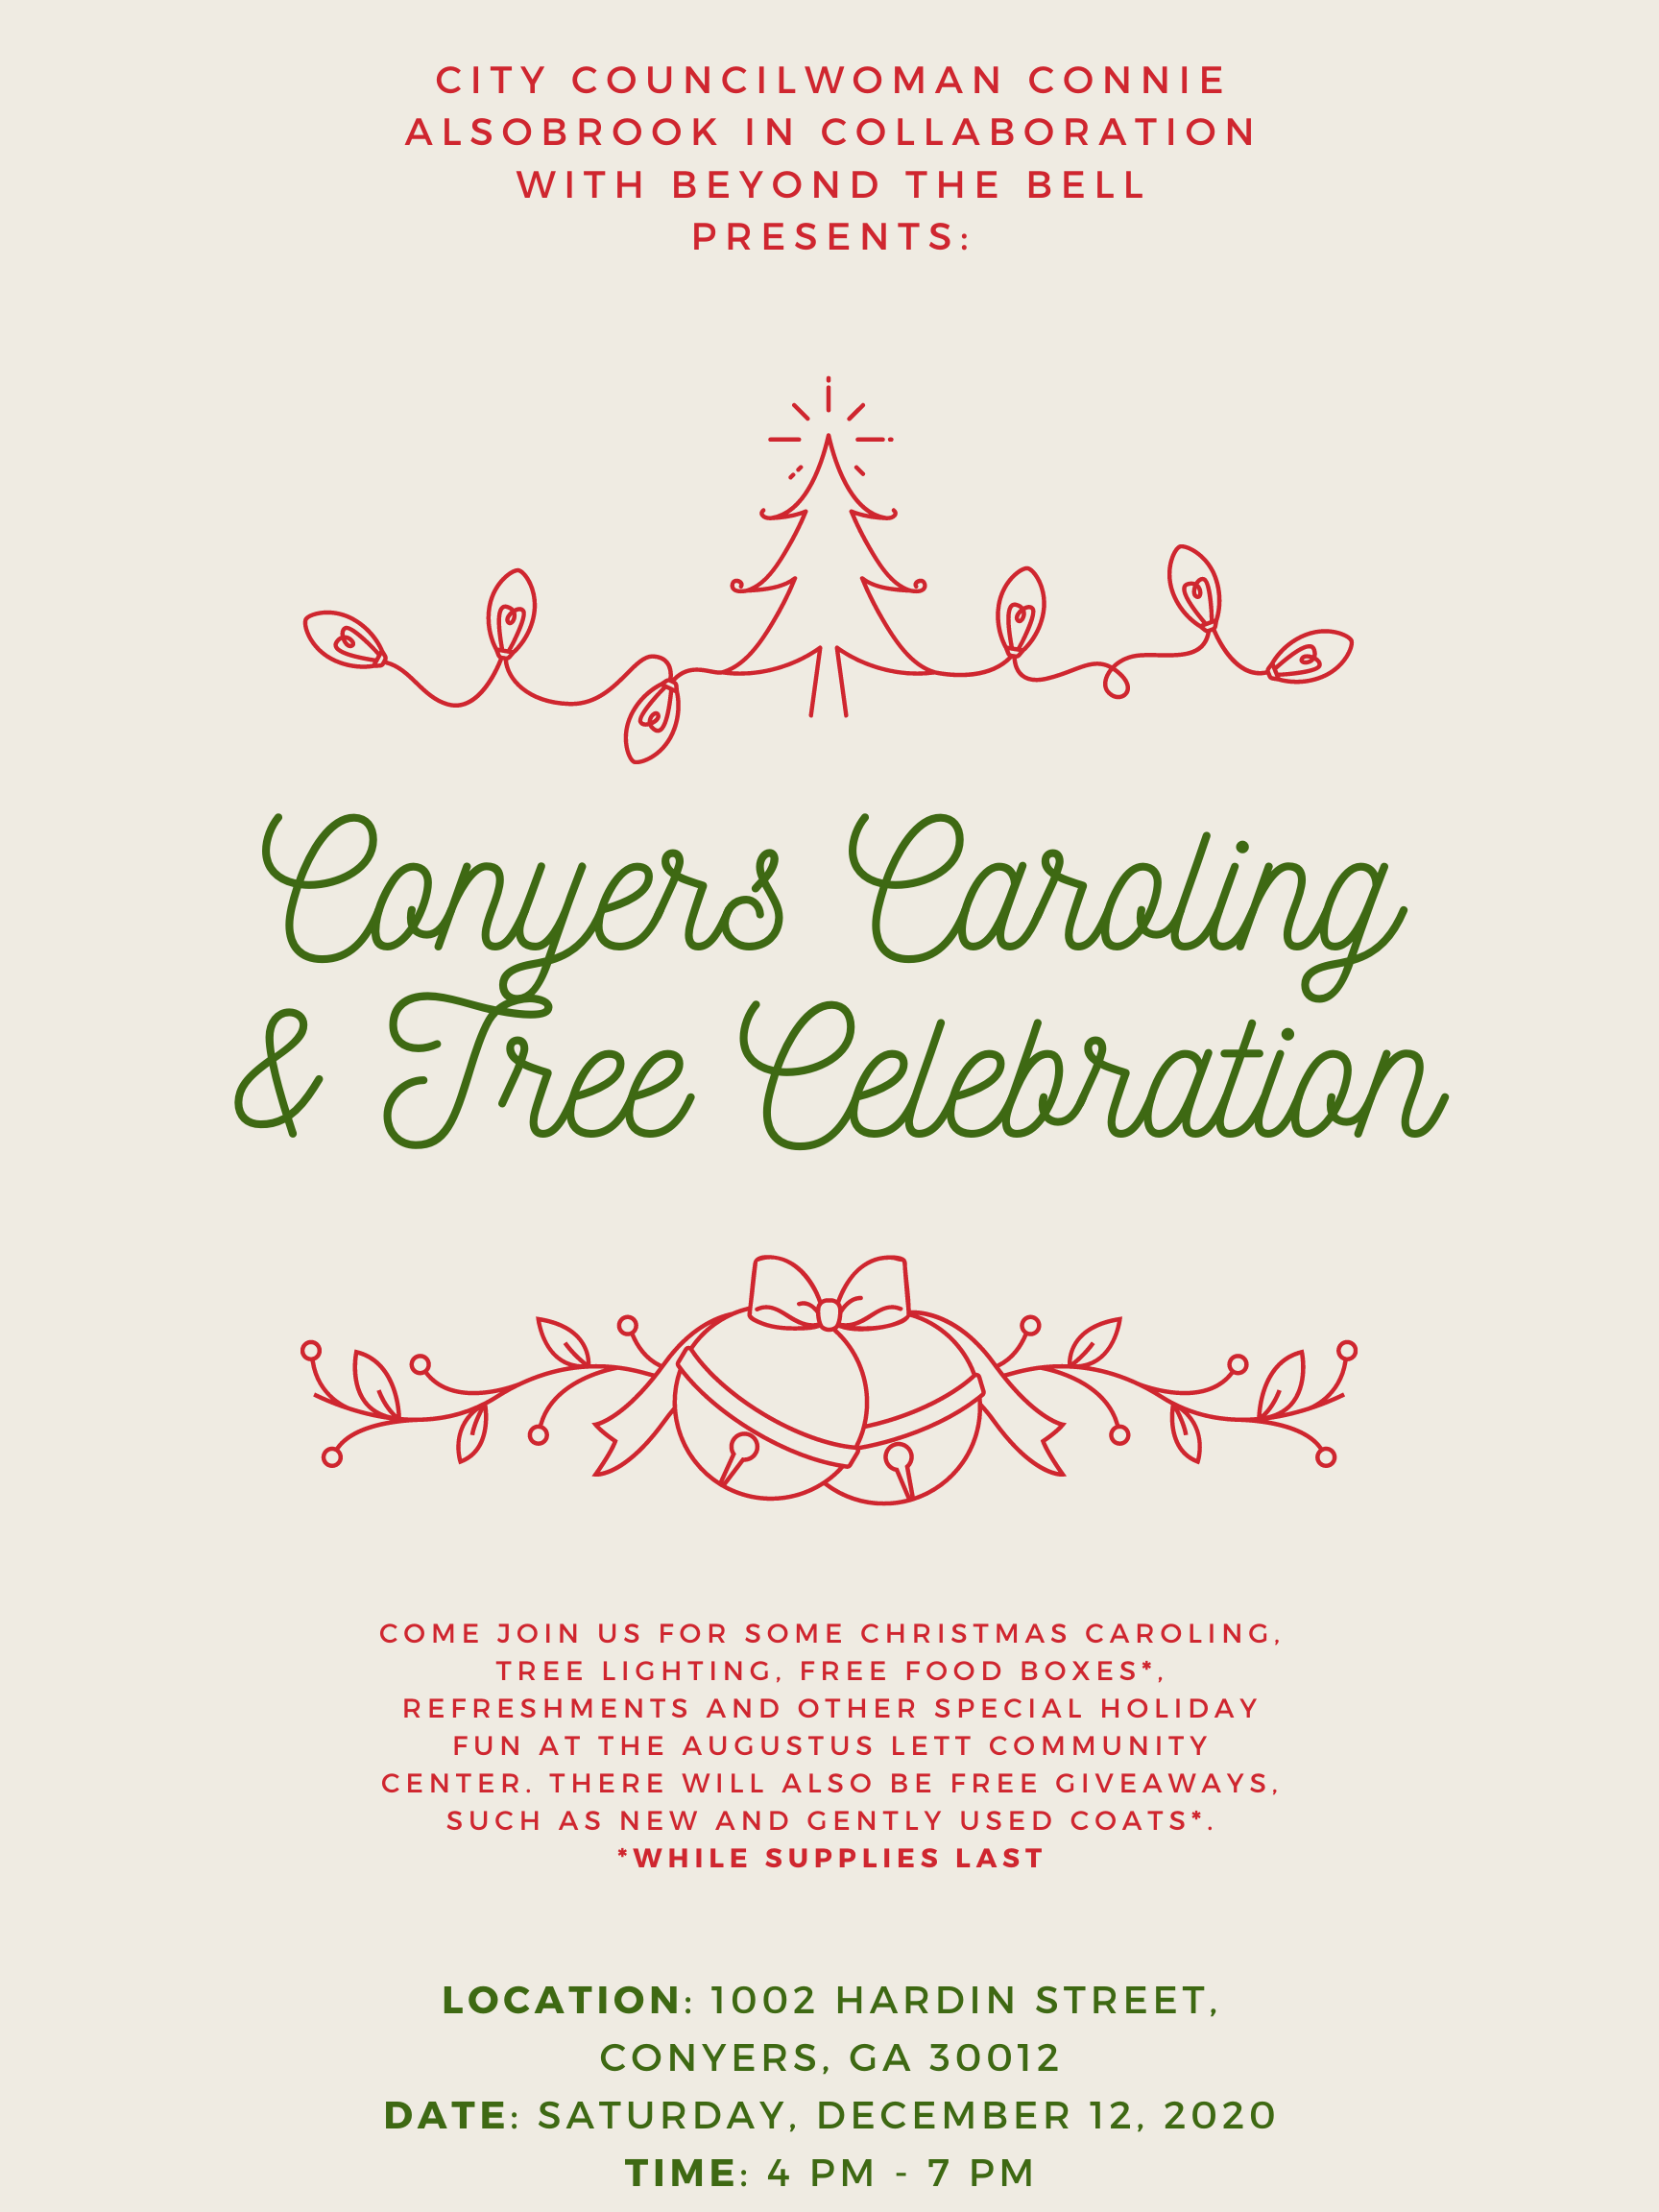 Red and green text on a cream background. Conyers Caroling & Tree Celebration. Saturday, Dec 12 2020 join us for Christmas caroling, tree lighting, food, refreshments, and other holiday fun.